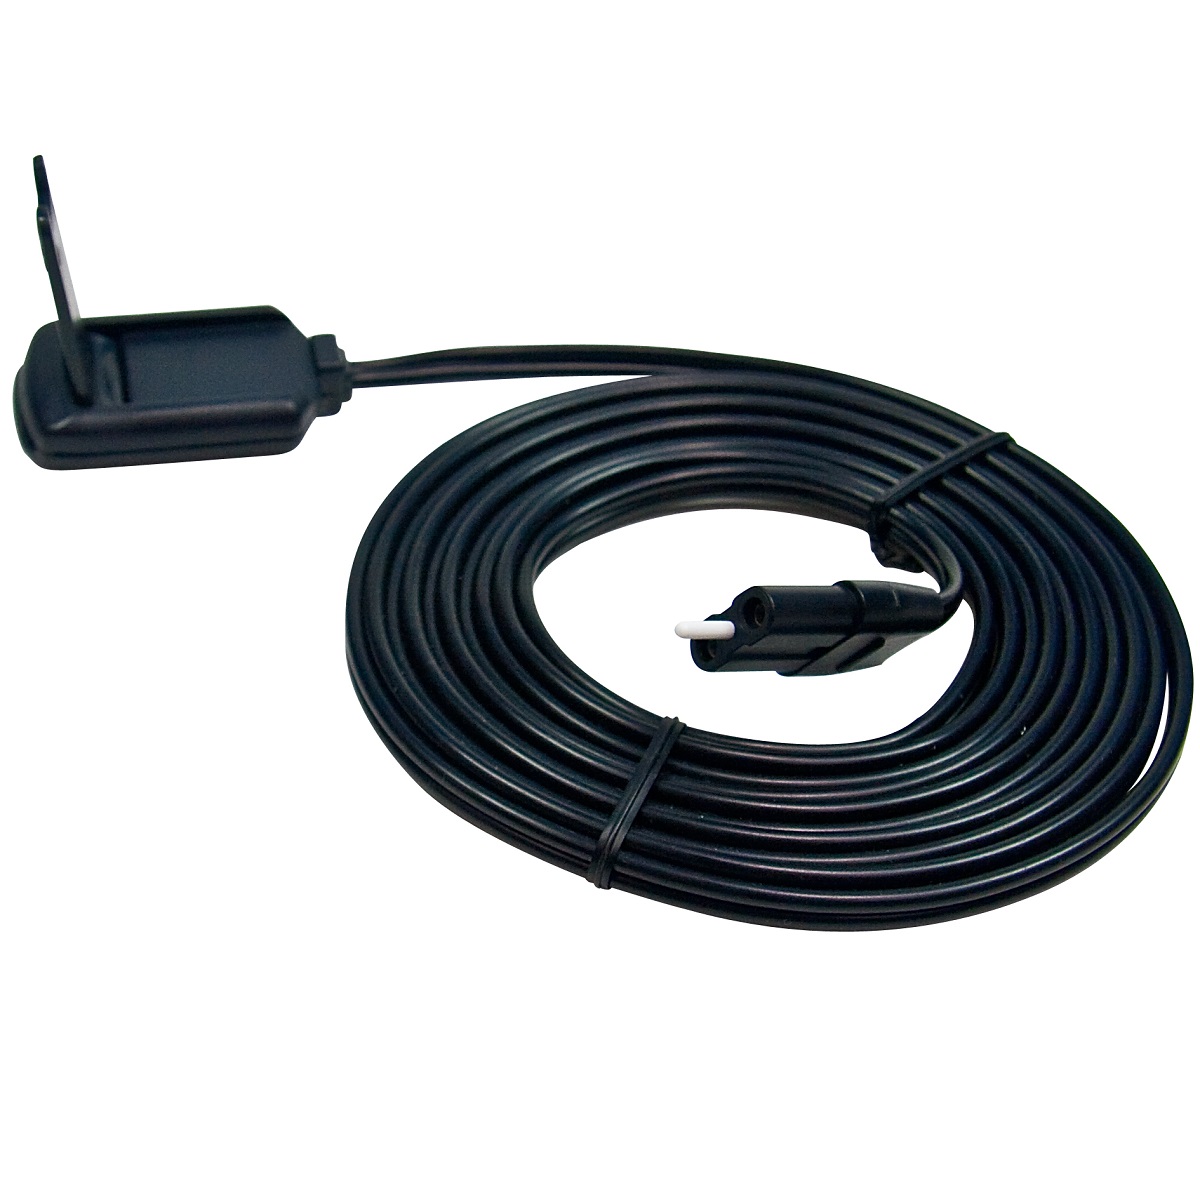 Reusable Grounding Cable